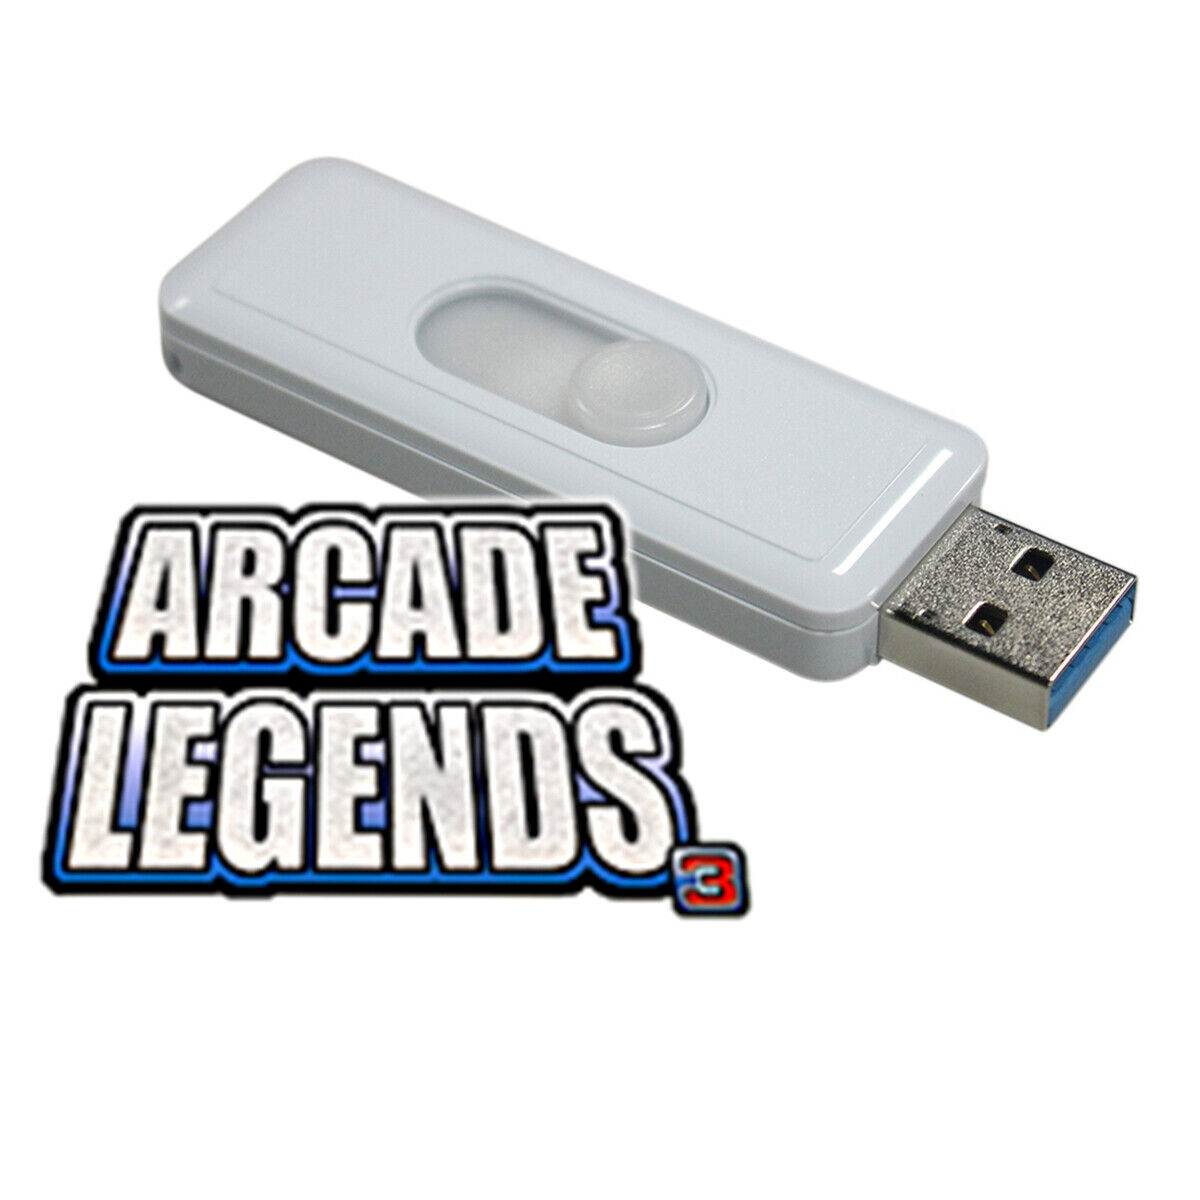 Chicago Gaming Arcade Legends 3 Game Pack 546 (For Games Made 12/2015 and After)